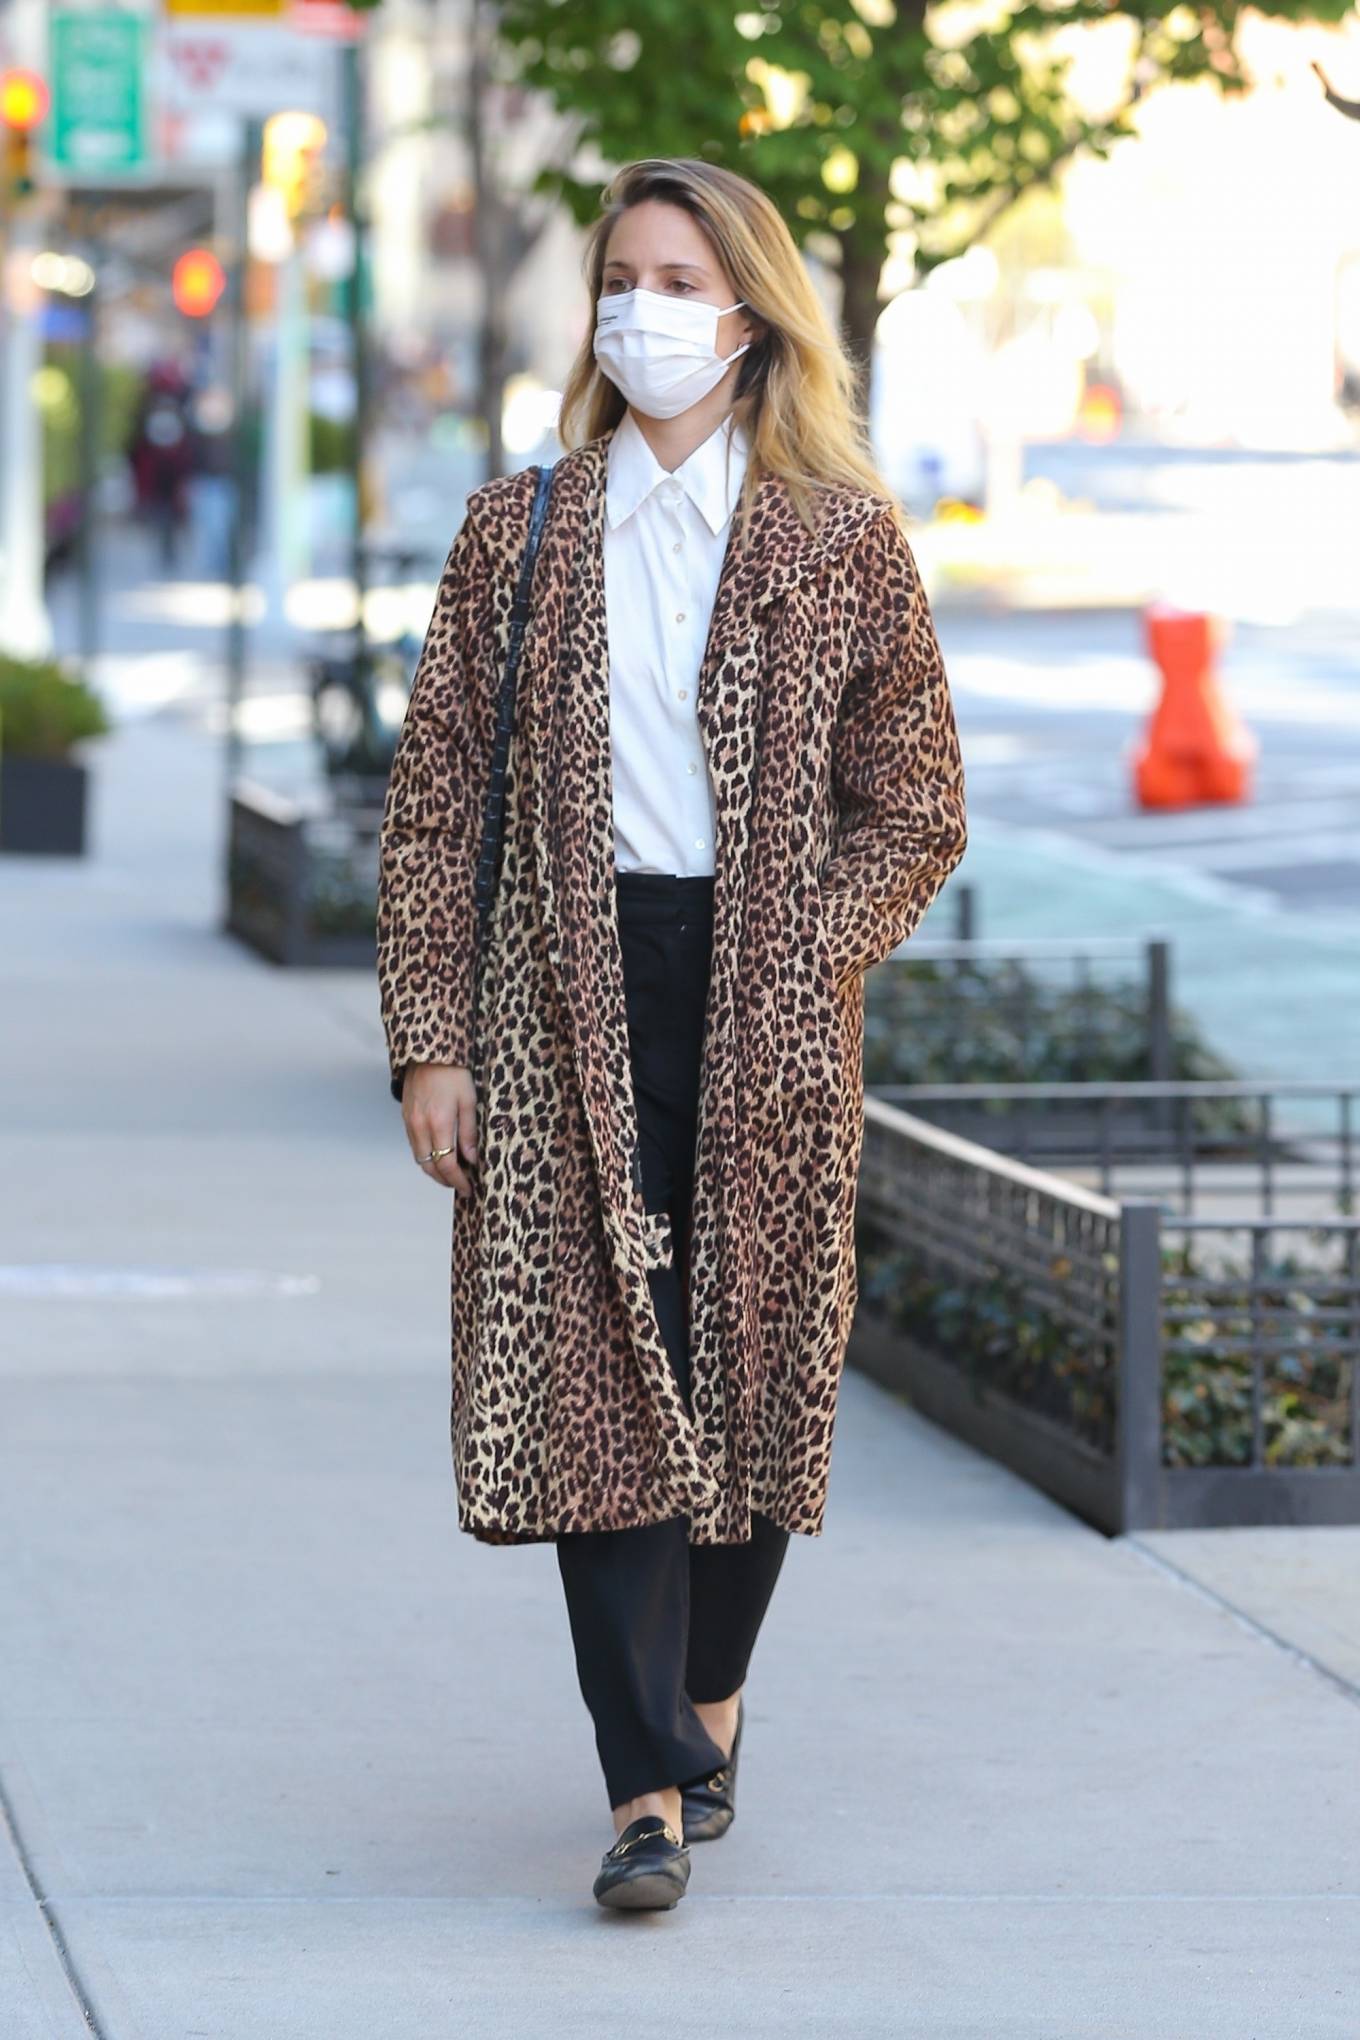 Dianna Agron - In a leopard print overcoat while out in New York